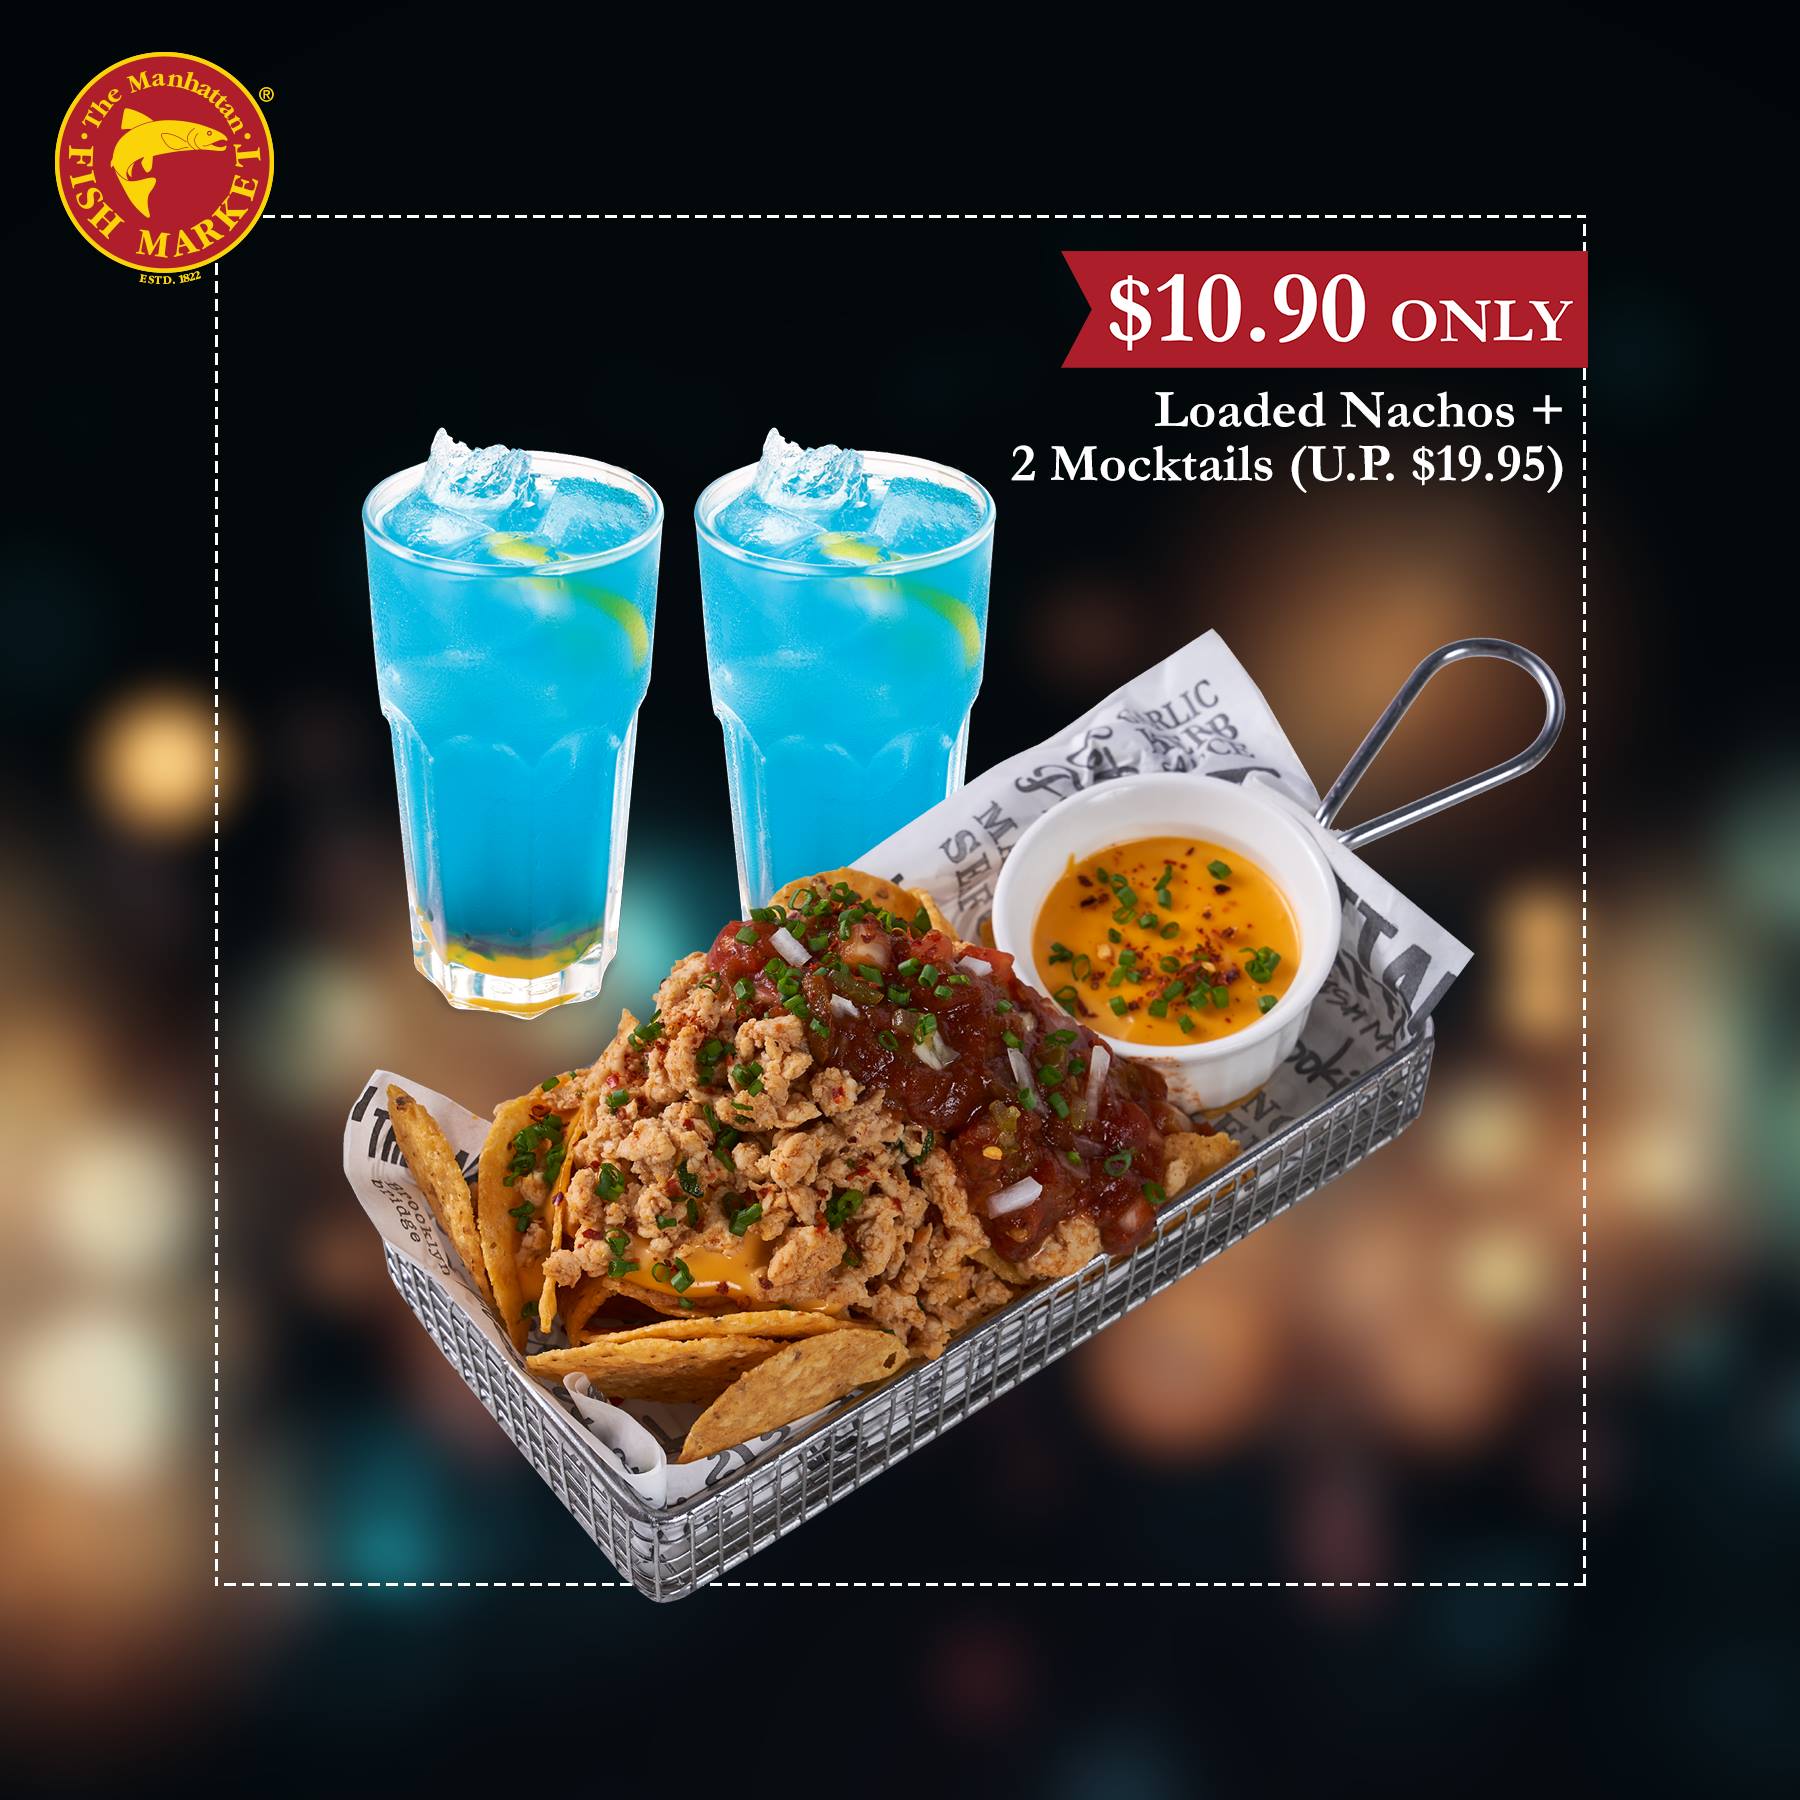 Flash these images to enjoy $9.90 & $10.90 deals at The Manhattan FISH MARKET. Valid from 23 Nov – 20 Dec 18 - 4